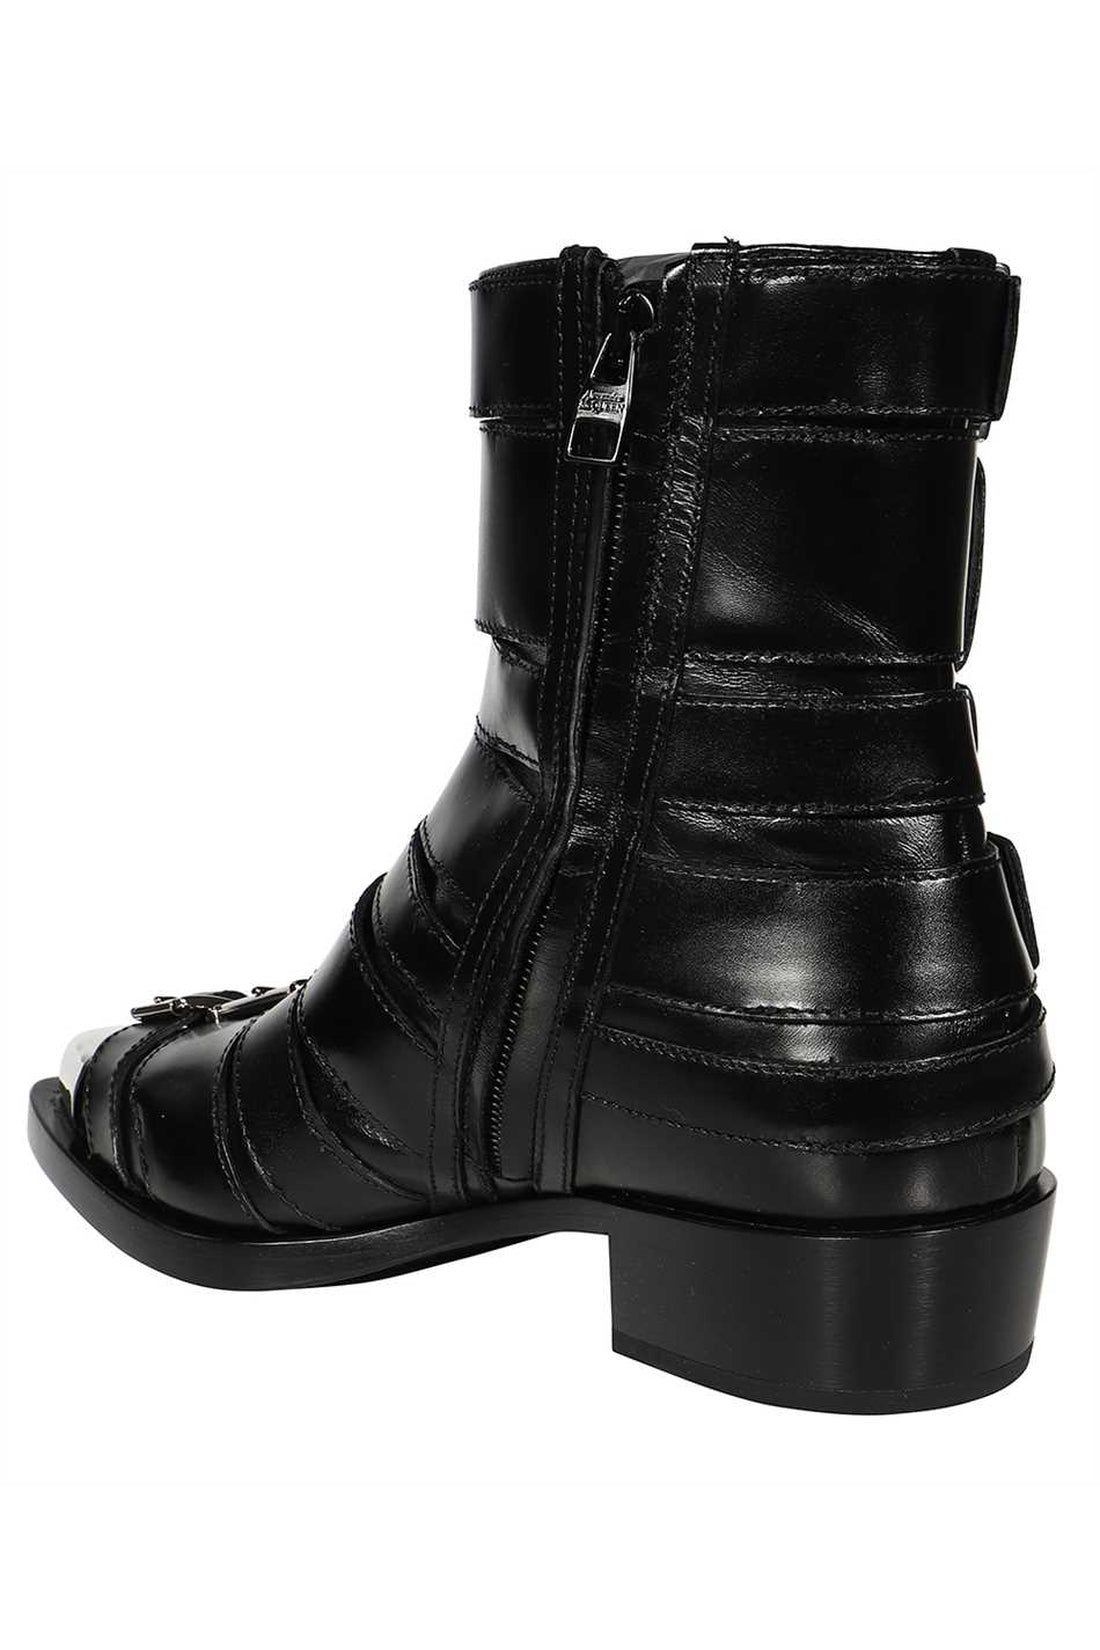 Alexander McQueen-OUTLET-SALE-Leather ankle boots-ARCHIVIST